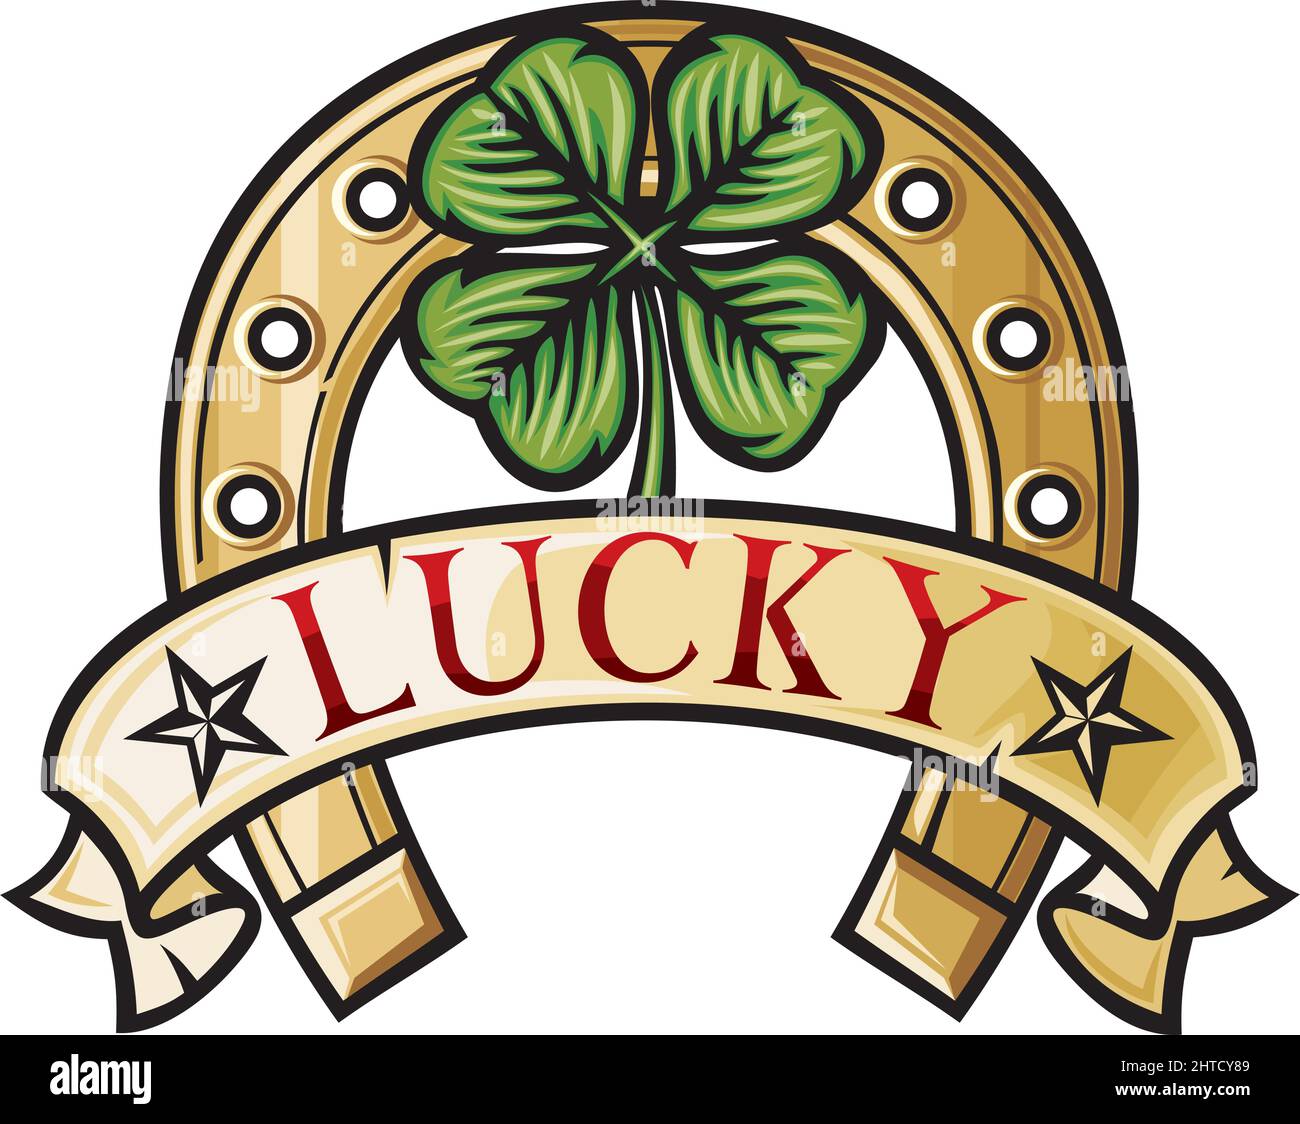 Horseshoe and four leaf clover - lucky symbol vector illustration Stock Vector